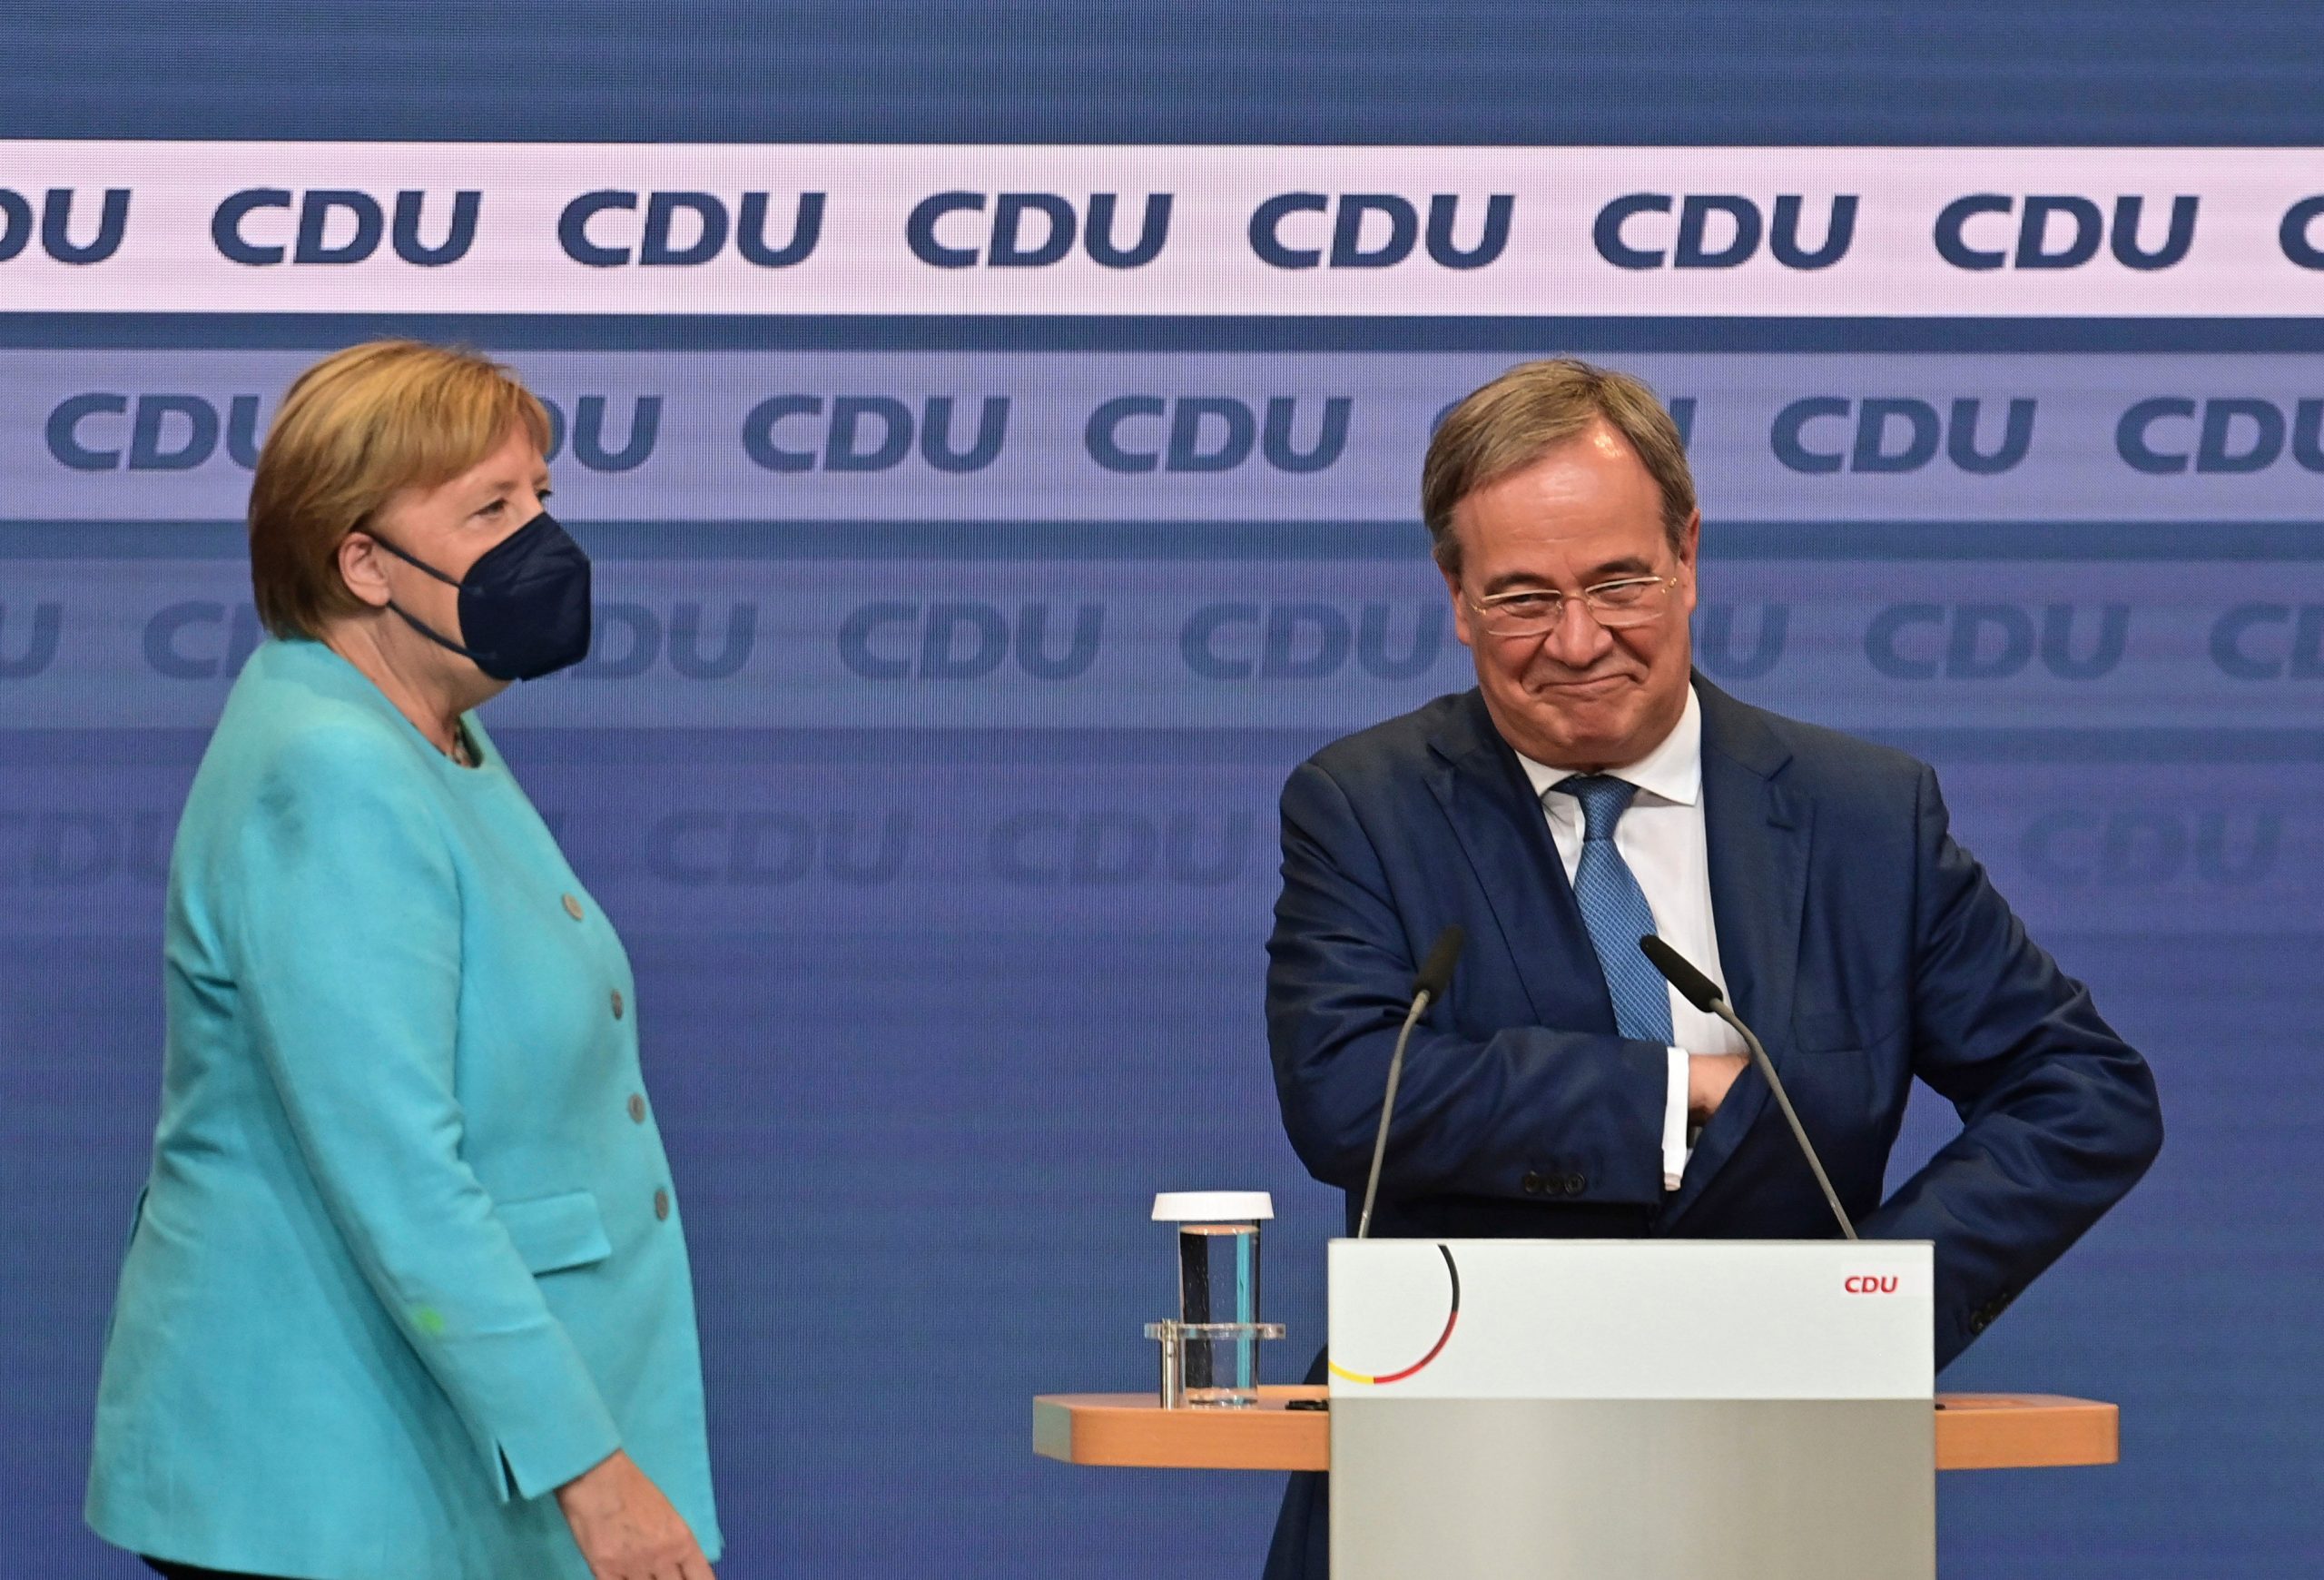 Germany polls: Angela Merkel’s party loses to Social Democrats after 16 years